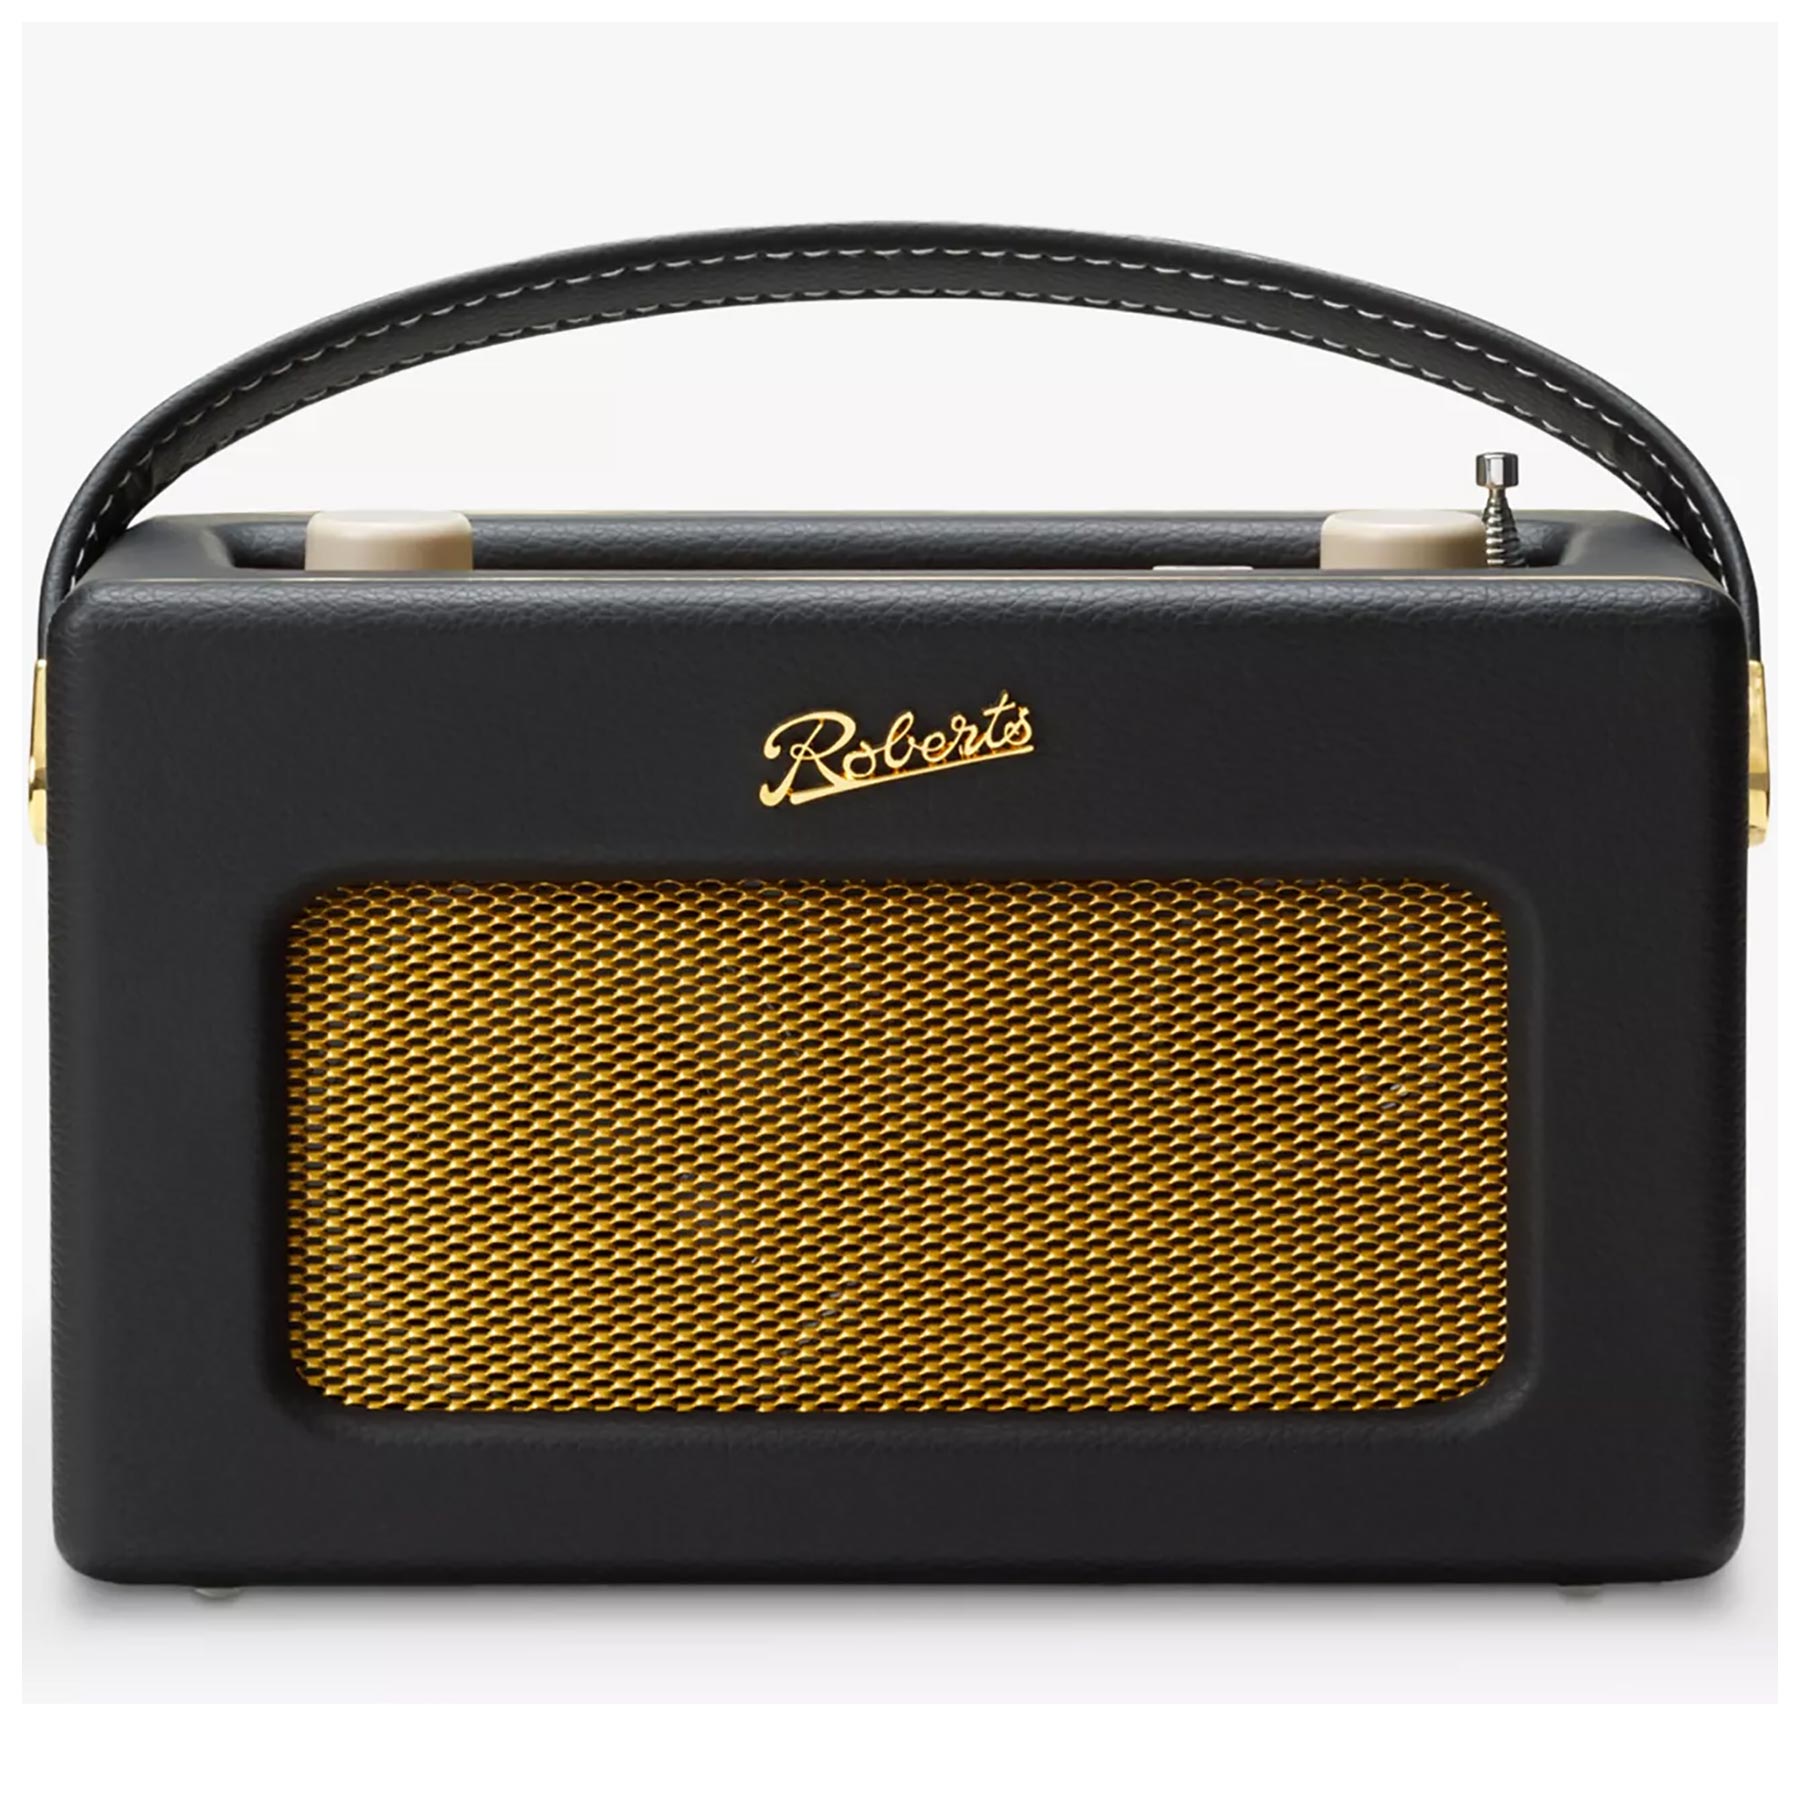 Image of Roberts ISTREAML Revival Smart DAB FM Radio with Alexa in Black